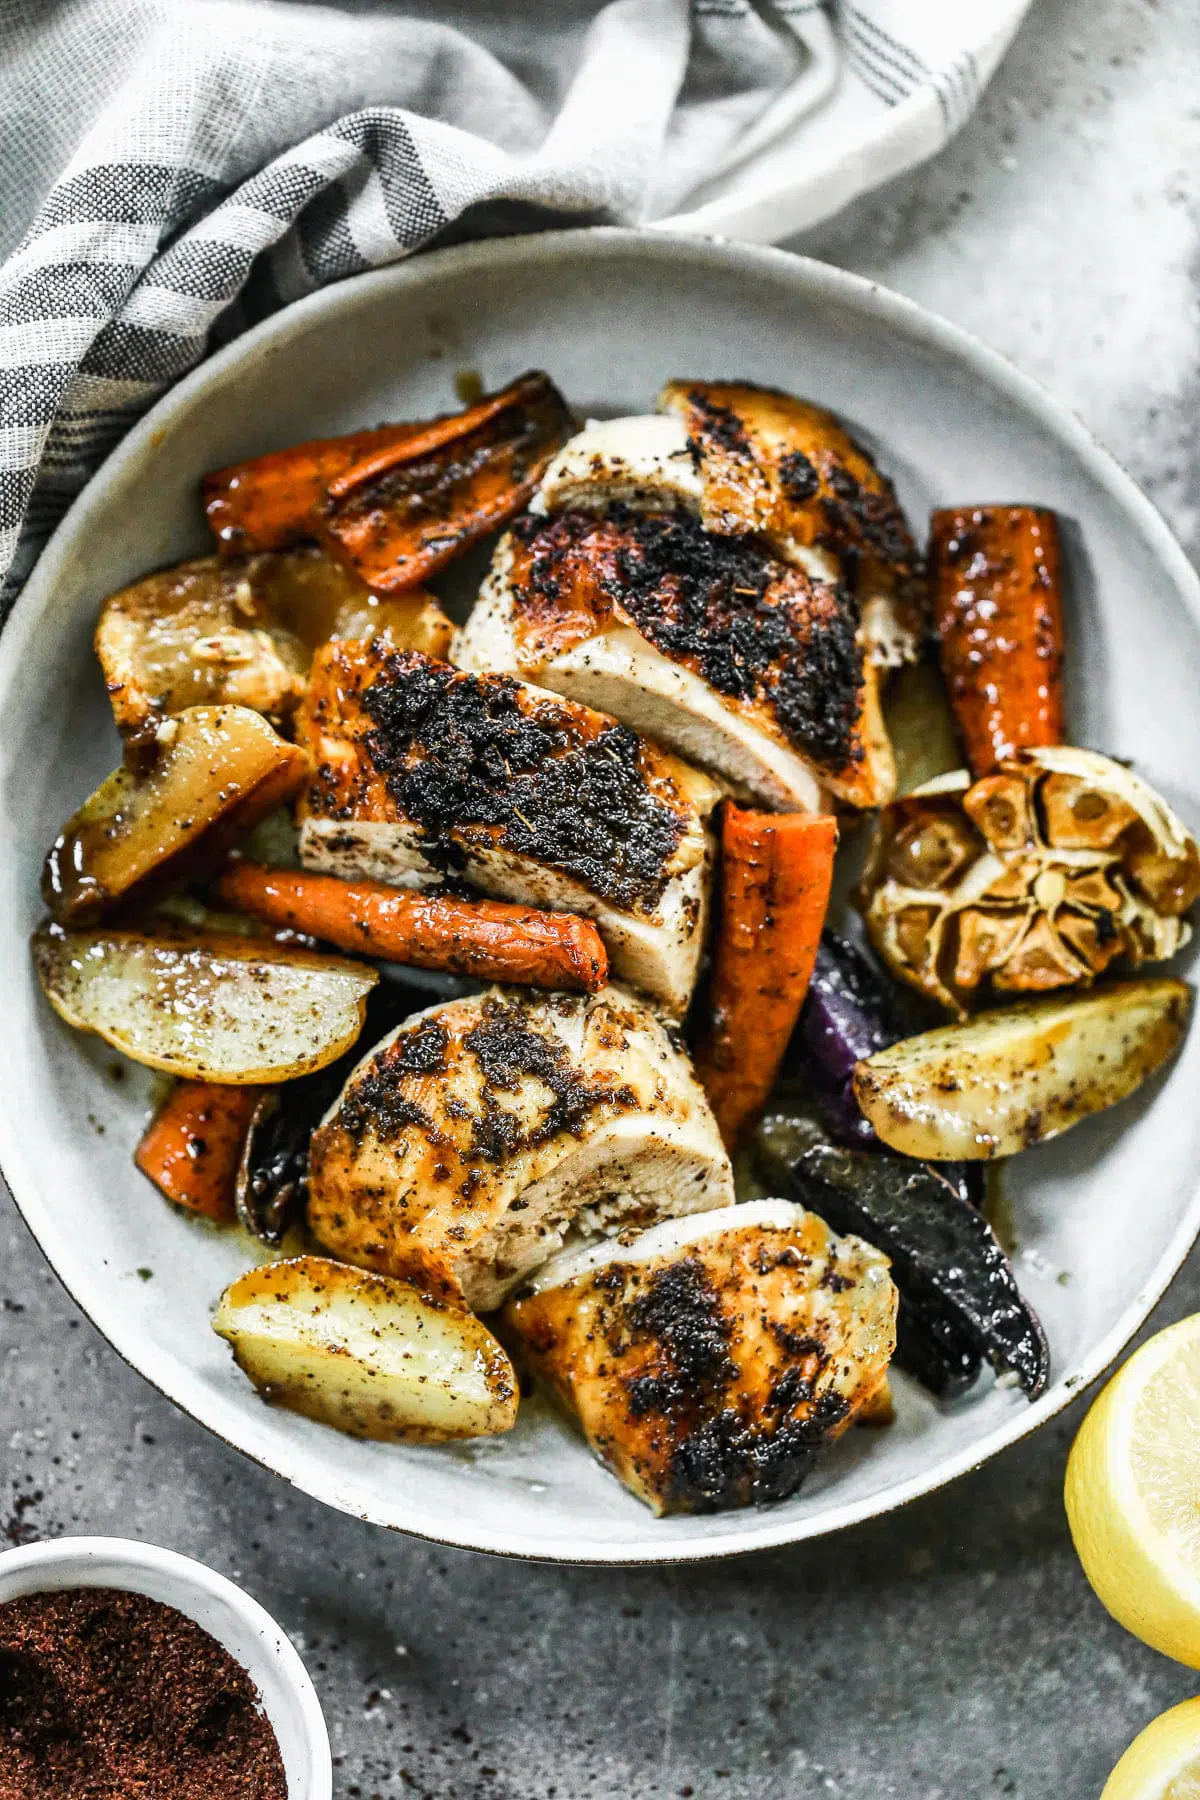 With a crispy sumac and garlic crusted skin and a juicy lemon-kissed interior, our Cast Iron Roast Chicken is not only perfectly delicious but the perfect fall dinner. Alongside the chicken, we scatter fingerling potatoes and whole carrots to sop up every bit of salty juice that drips to the bottom of the pan.